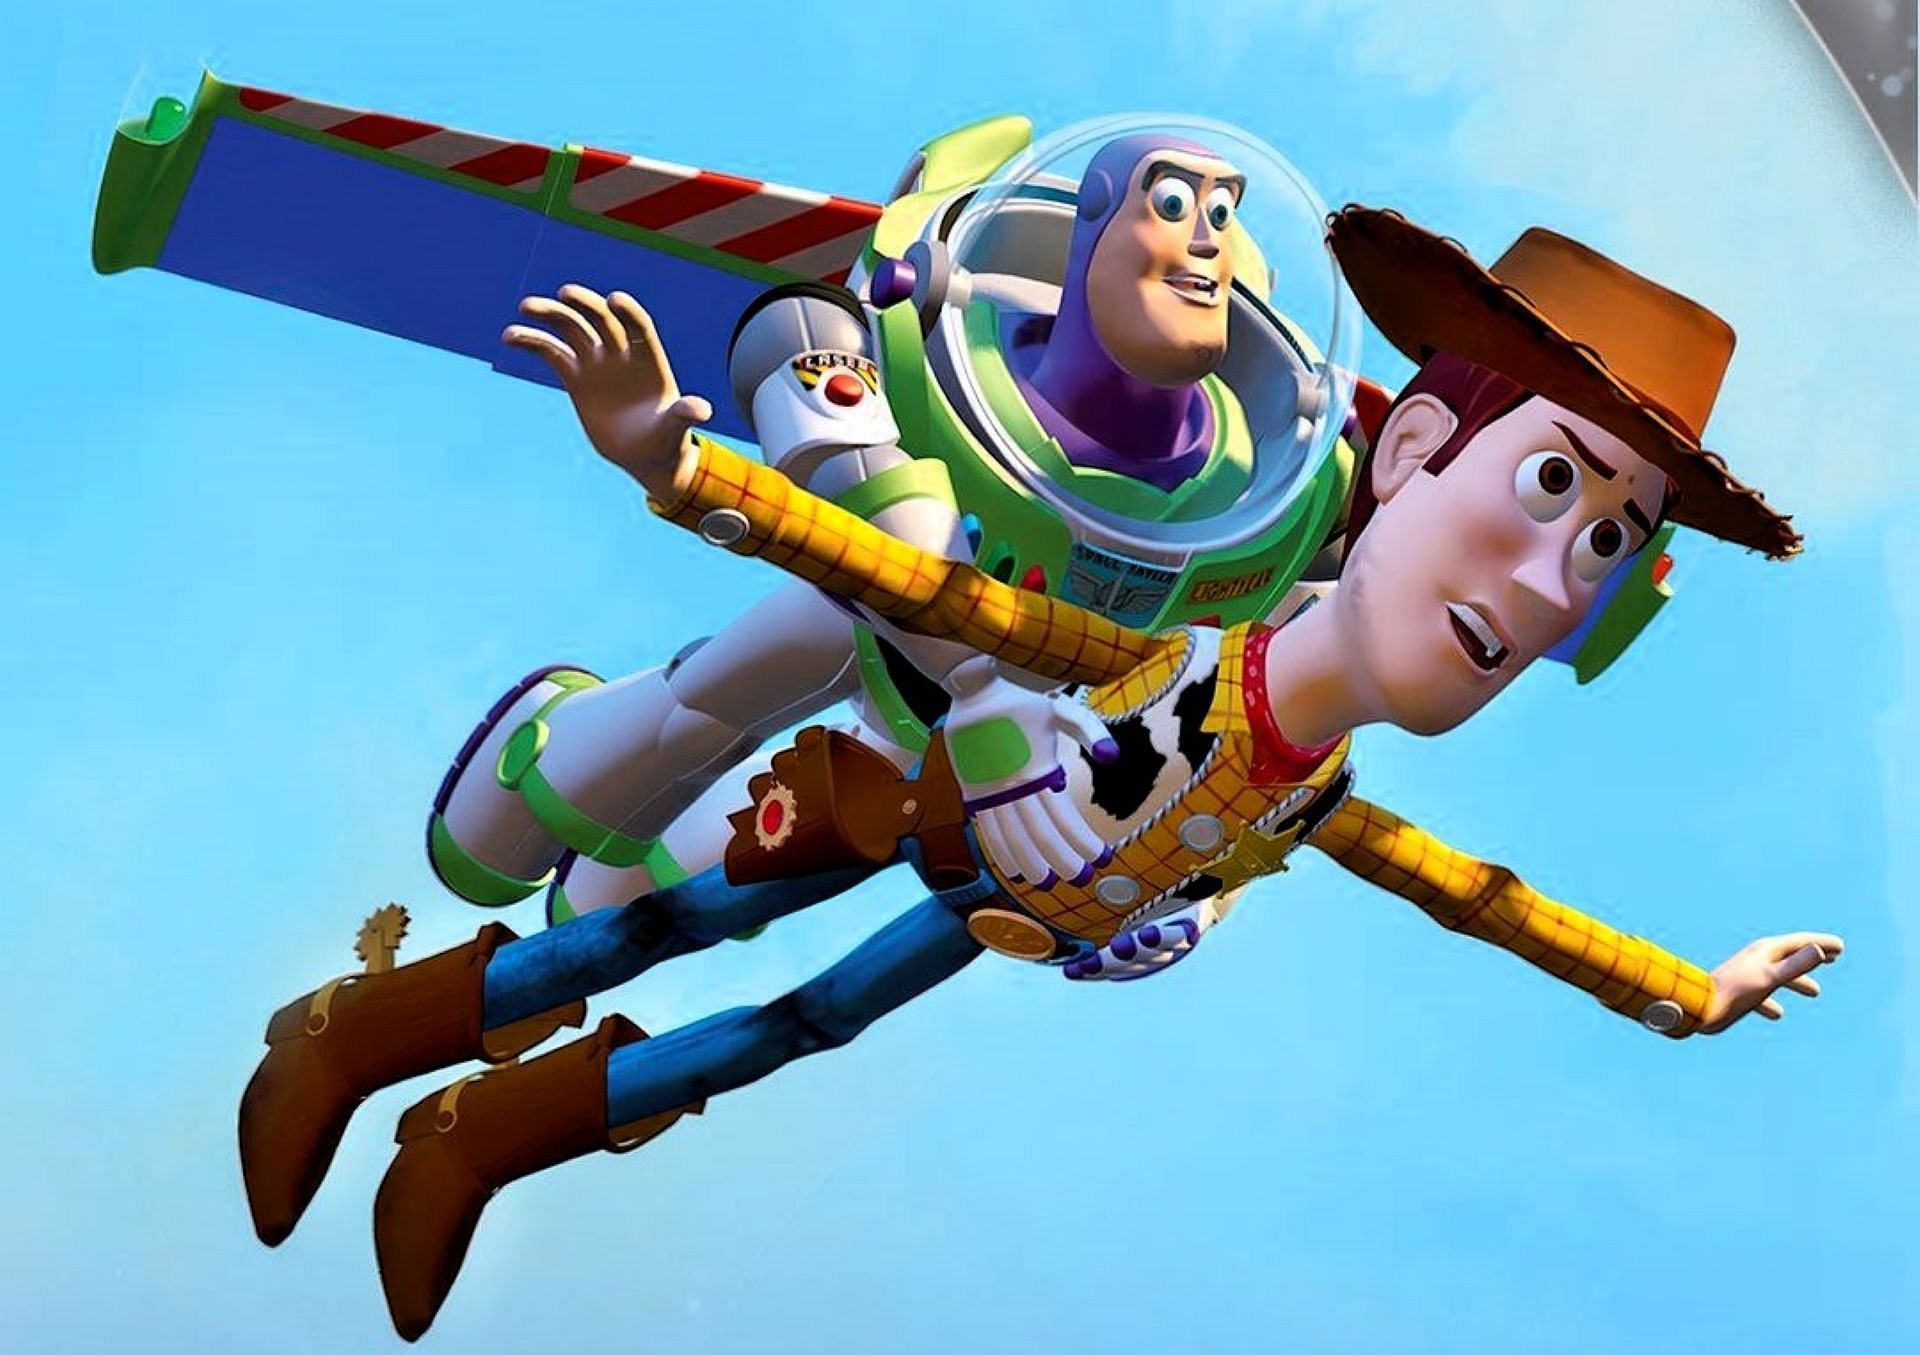 Disney&#039;s Toy Story may just be toys according to a conspiracy theory (Image via Instagram/toystory)